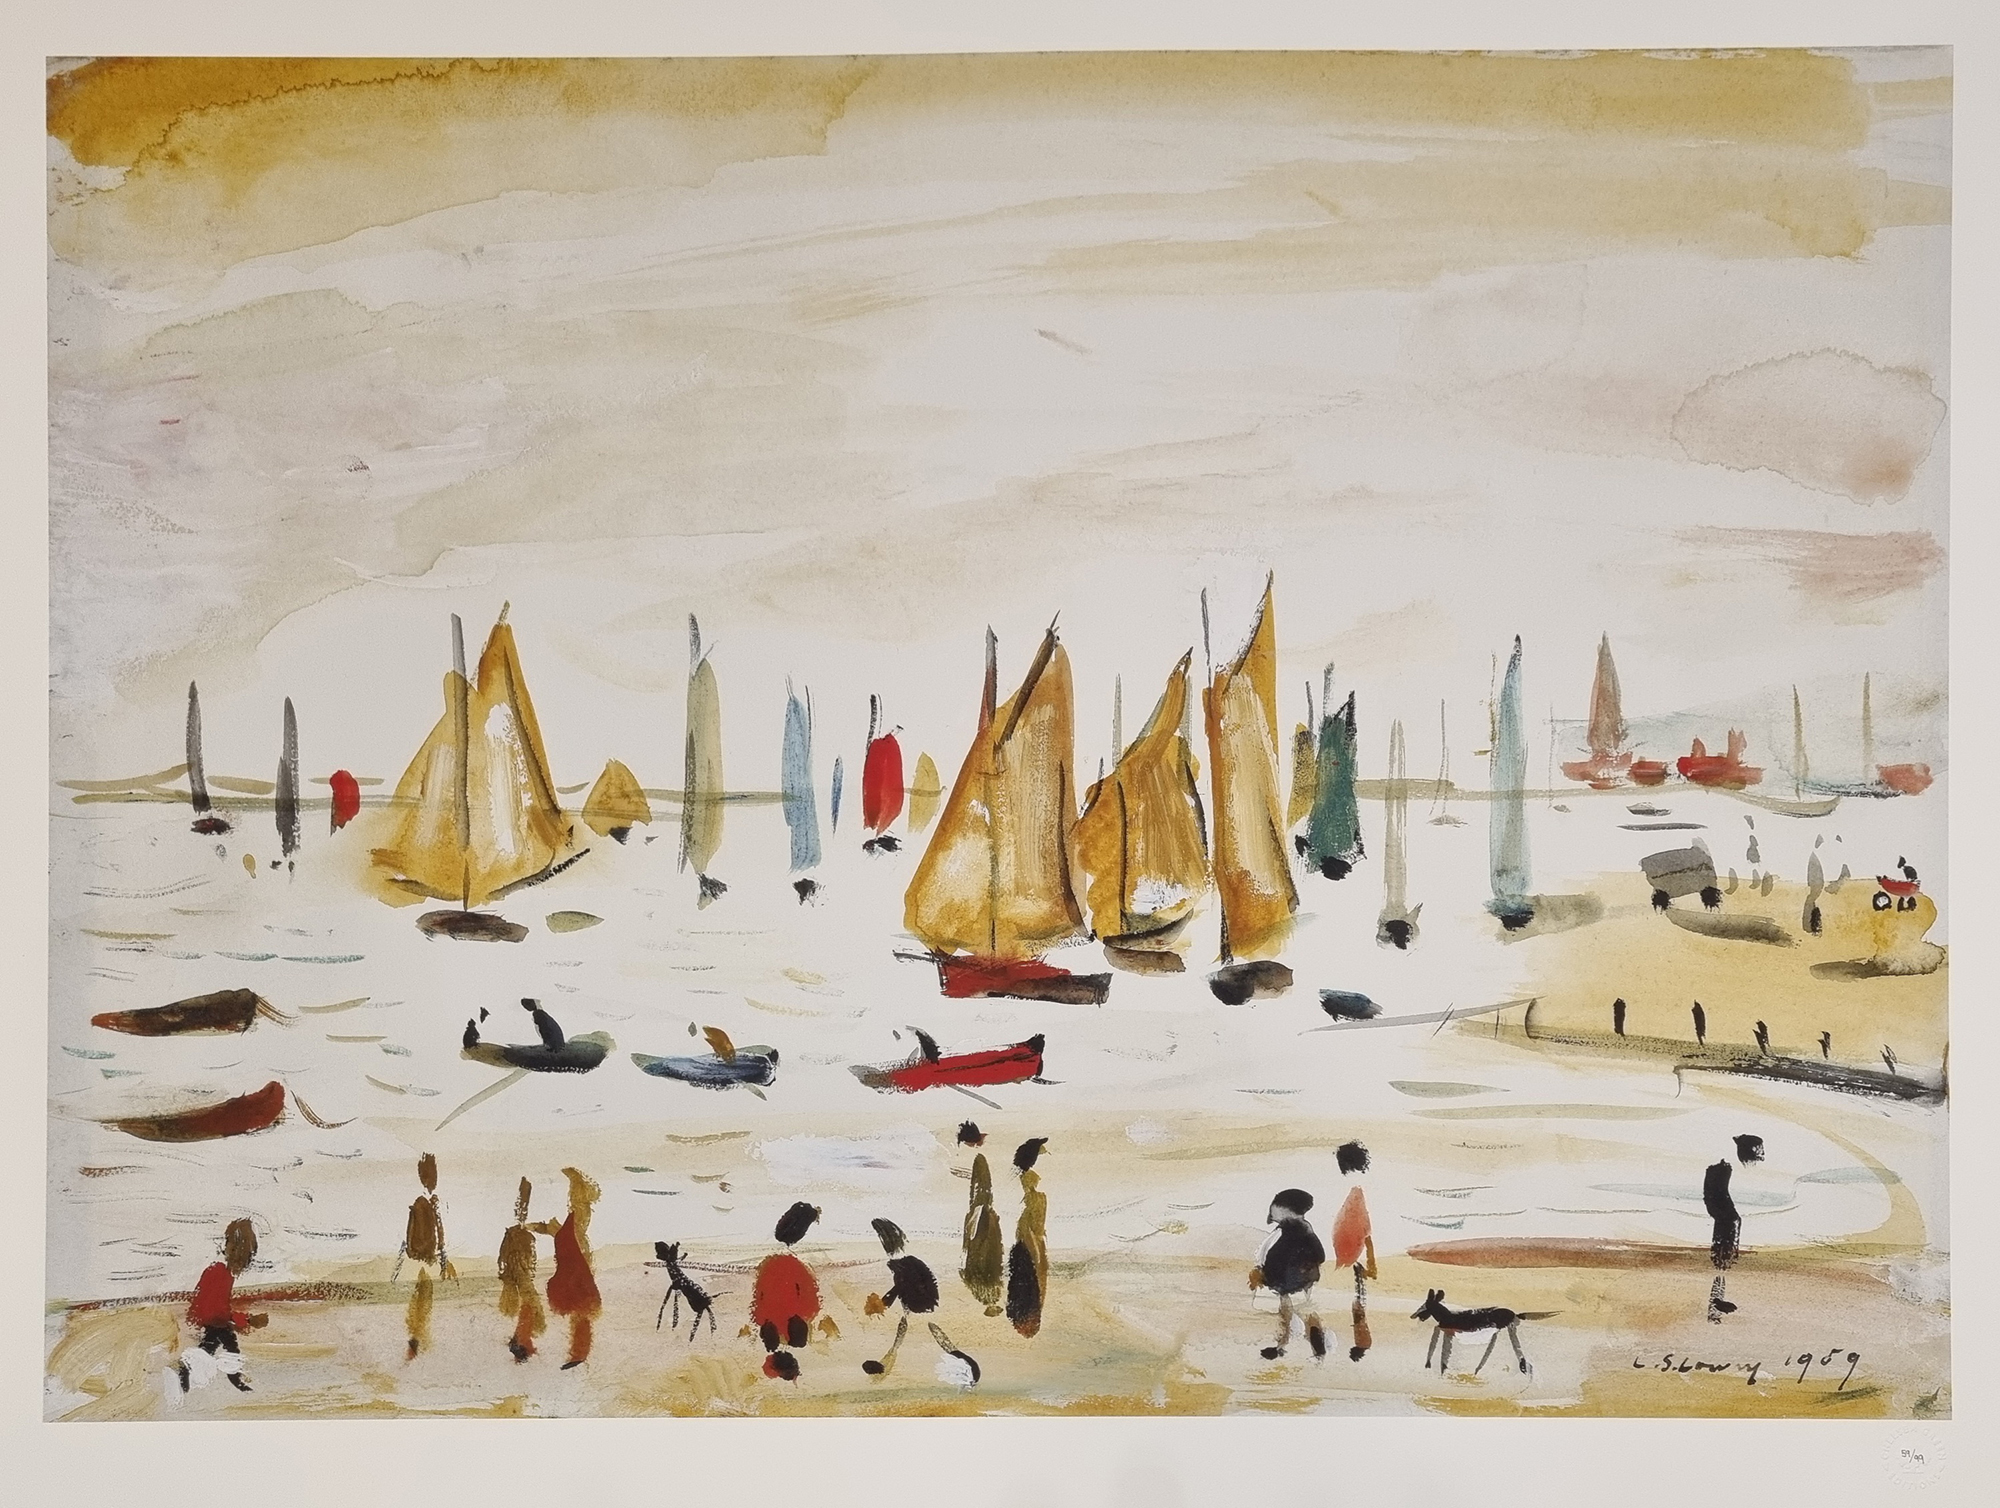 Limited Edition by L.S. Lowry "Yachts, 1959" with Certificate. - Image 2 of 6